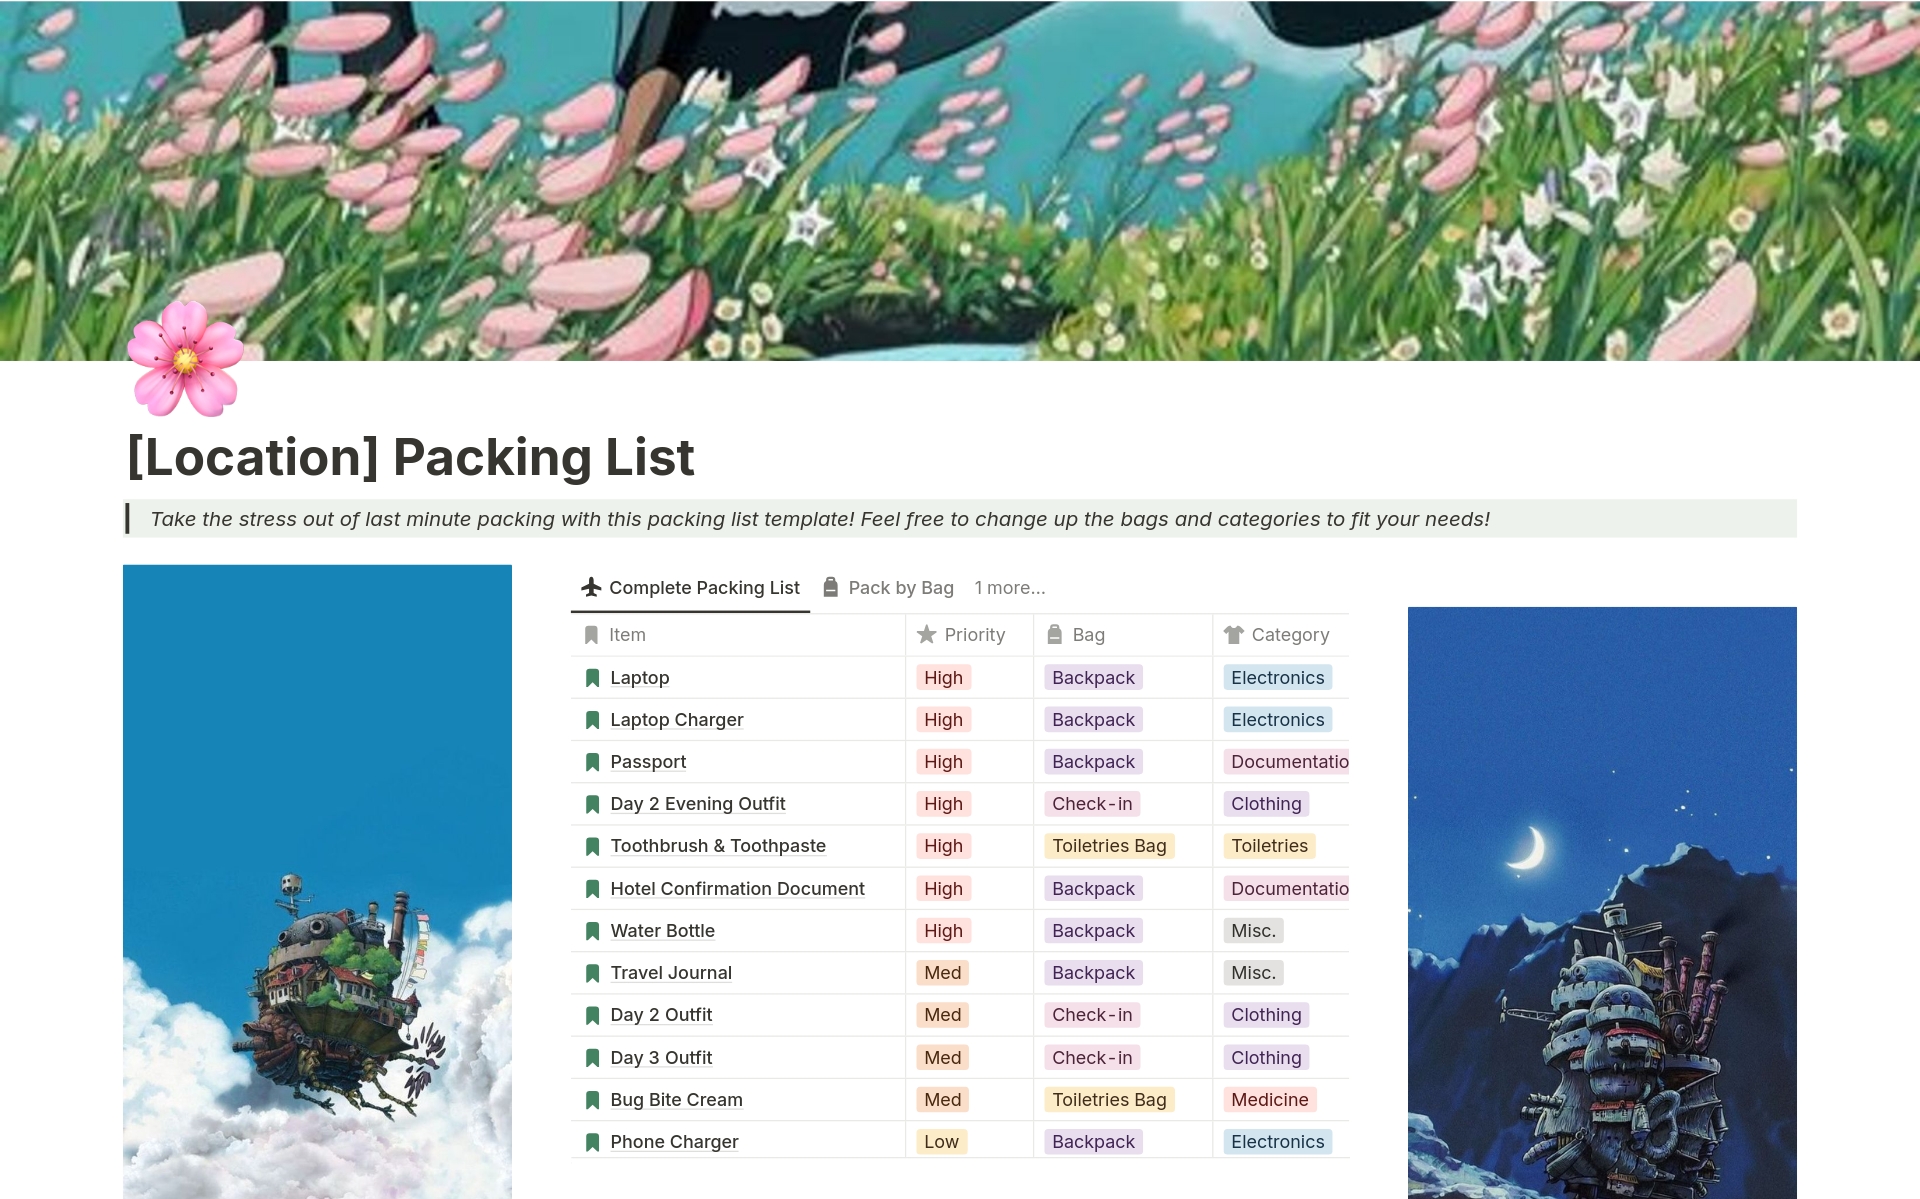 Take the stress out of last minute packing with this cute packing list template! 